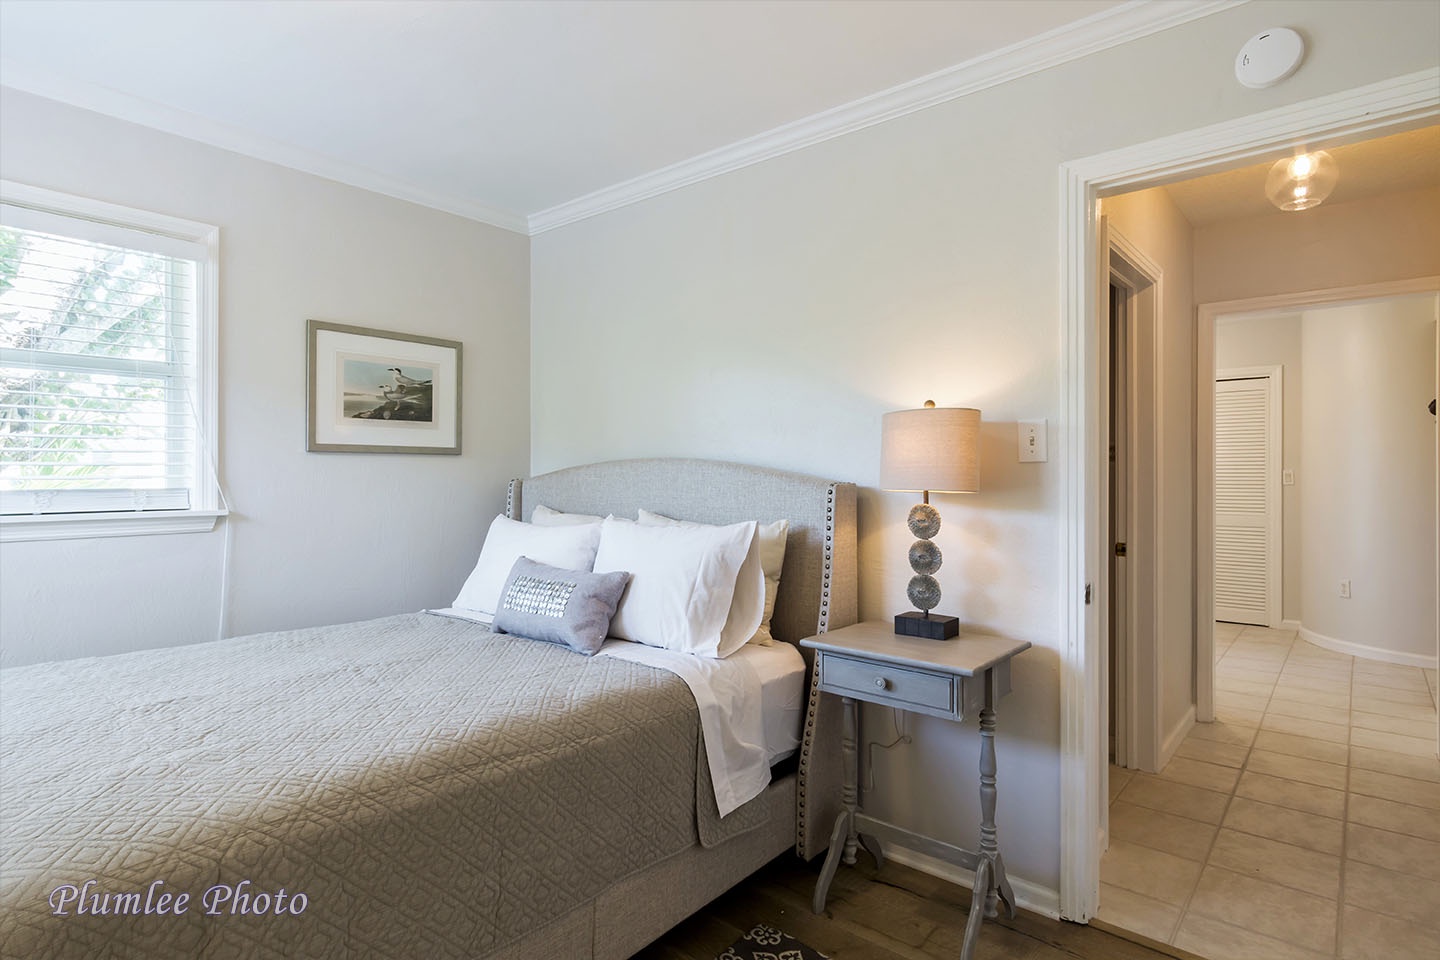 The bedroom on the first floor is helpful for anyone with mobility issues.